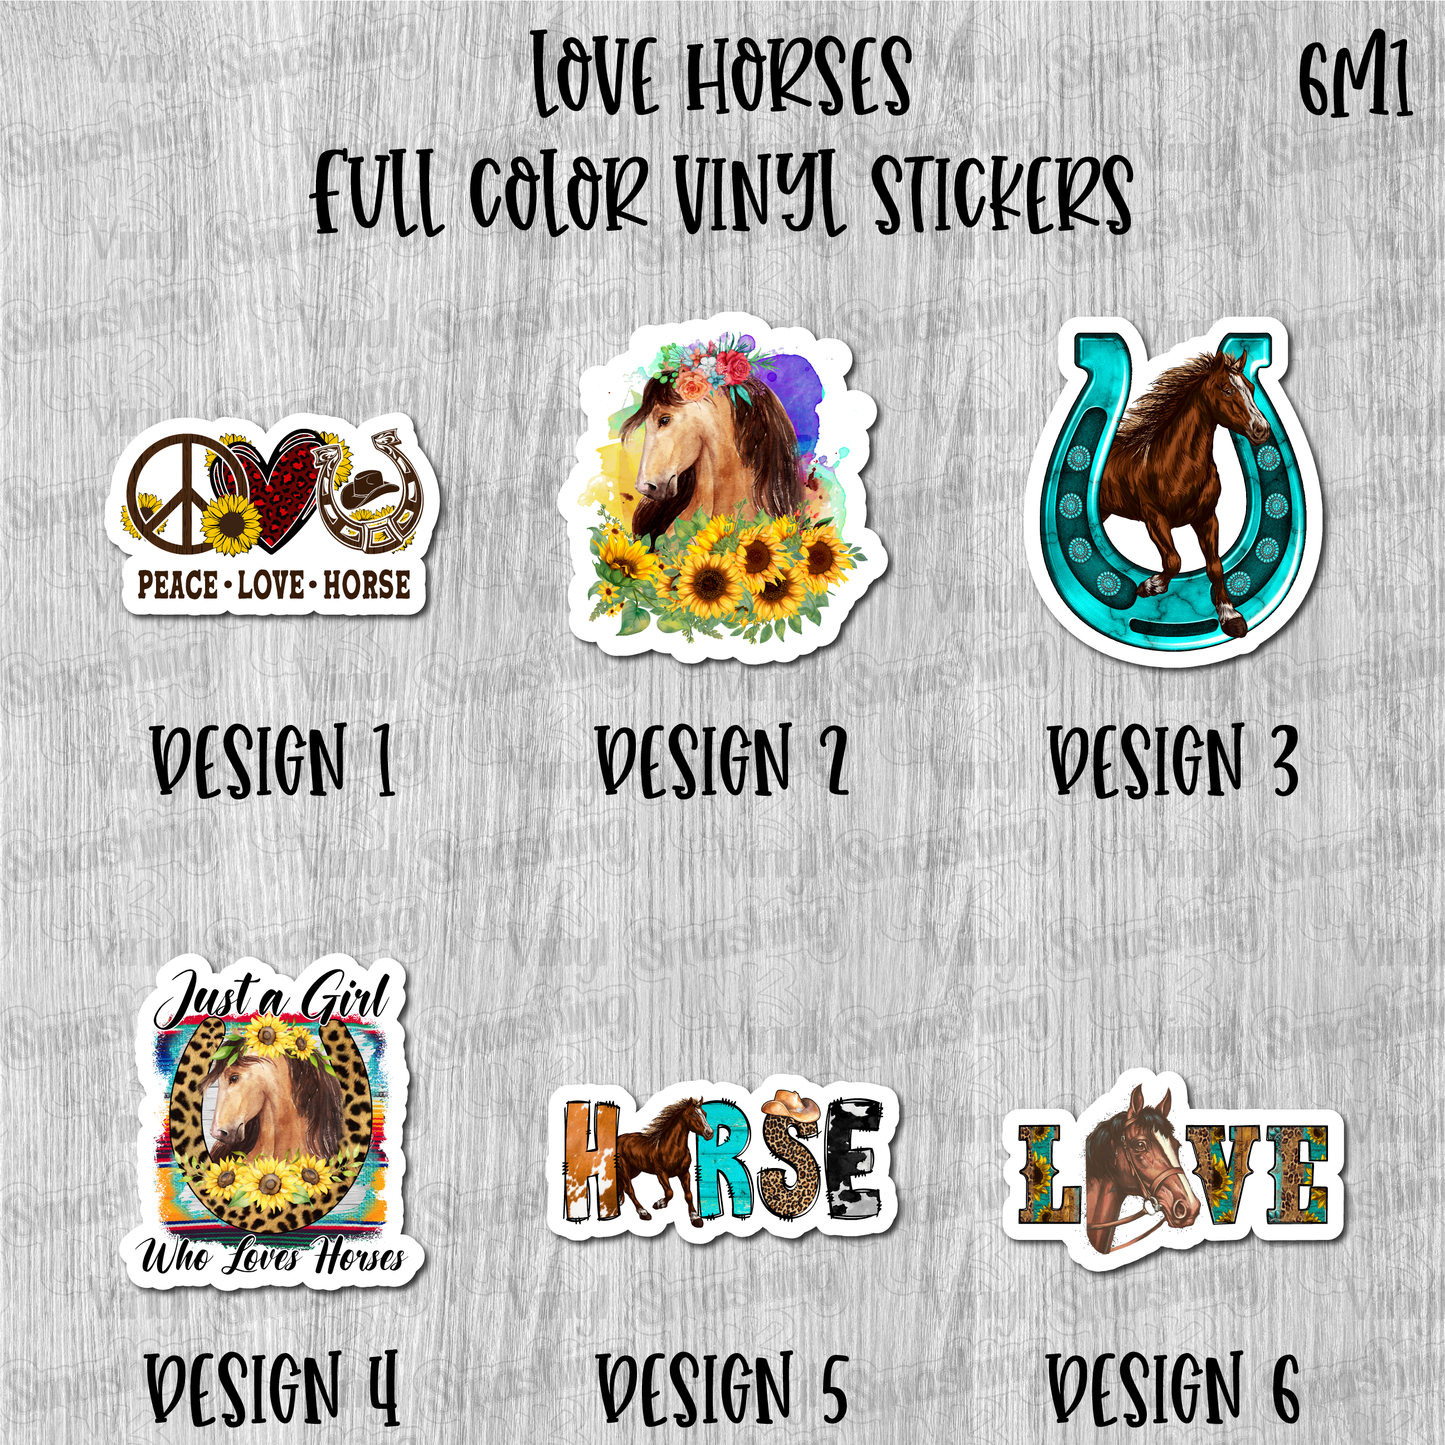 Love Horses - Full Color Vinyl Stickers (SHIPS IN 3-7 BUS DAYS)